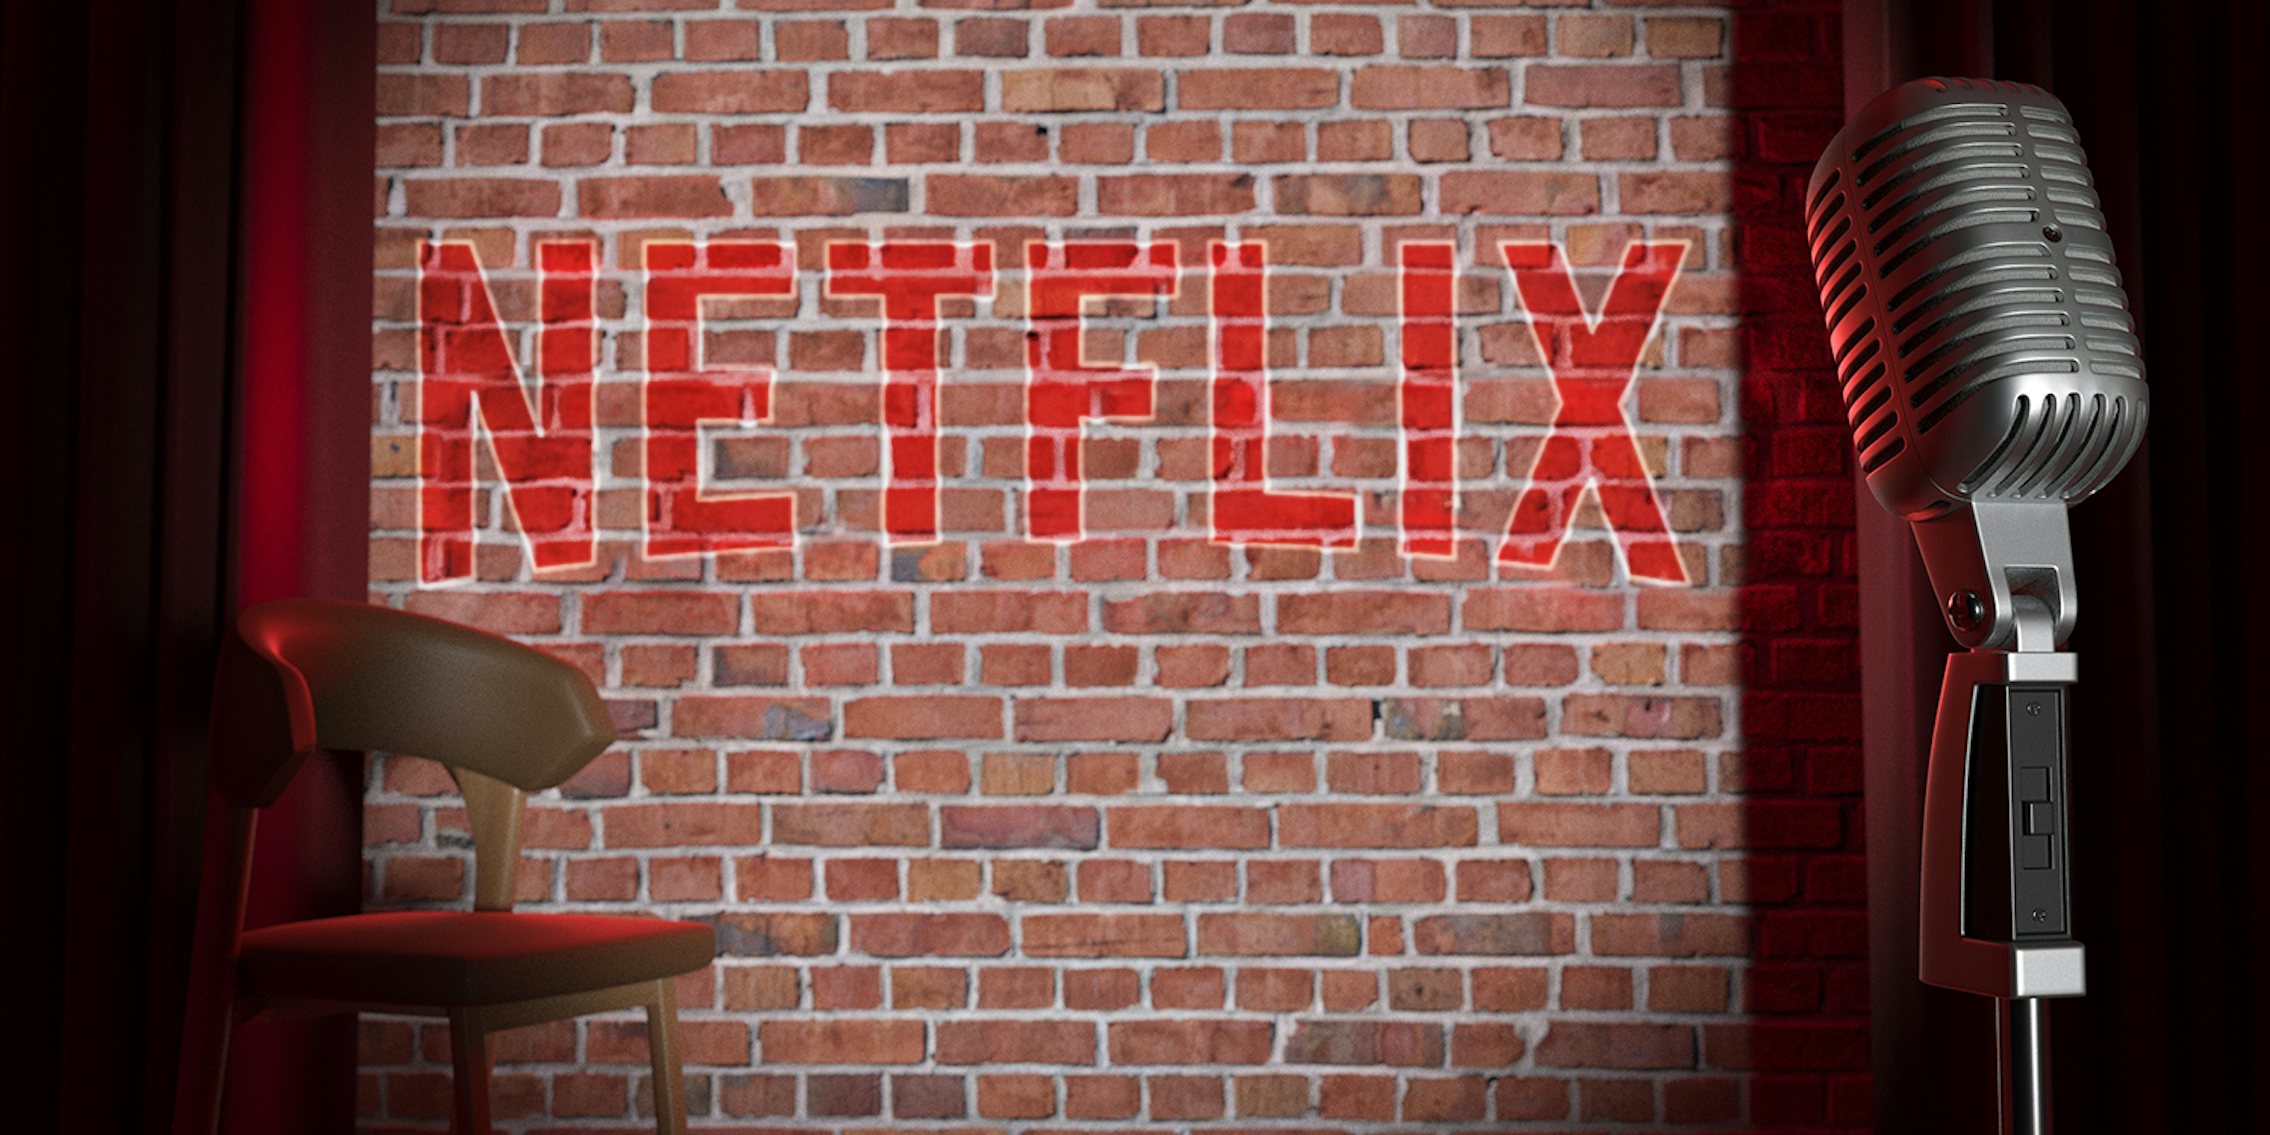 Stand-up comedy stage with Netflix logo